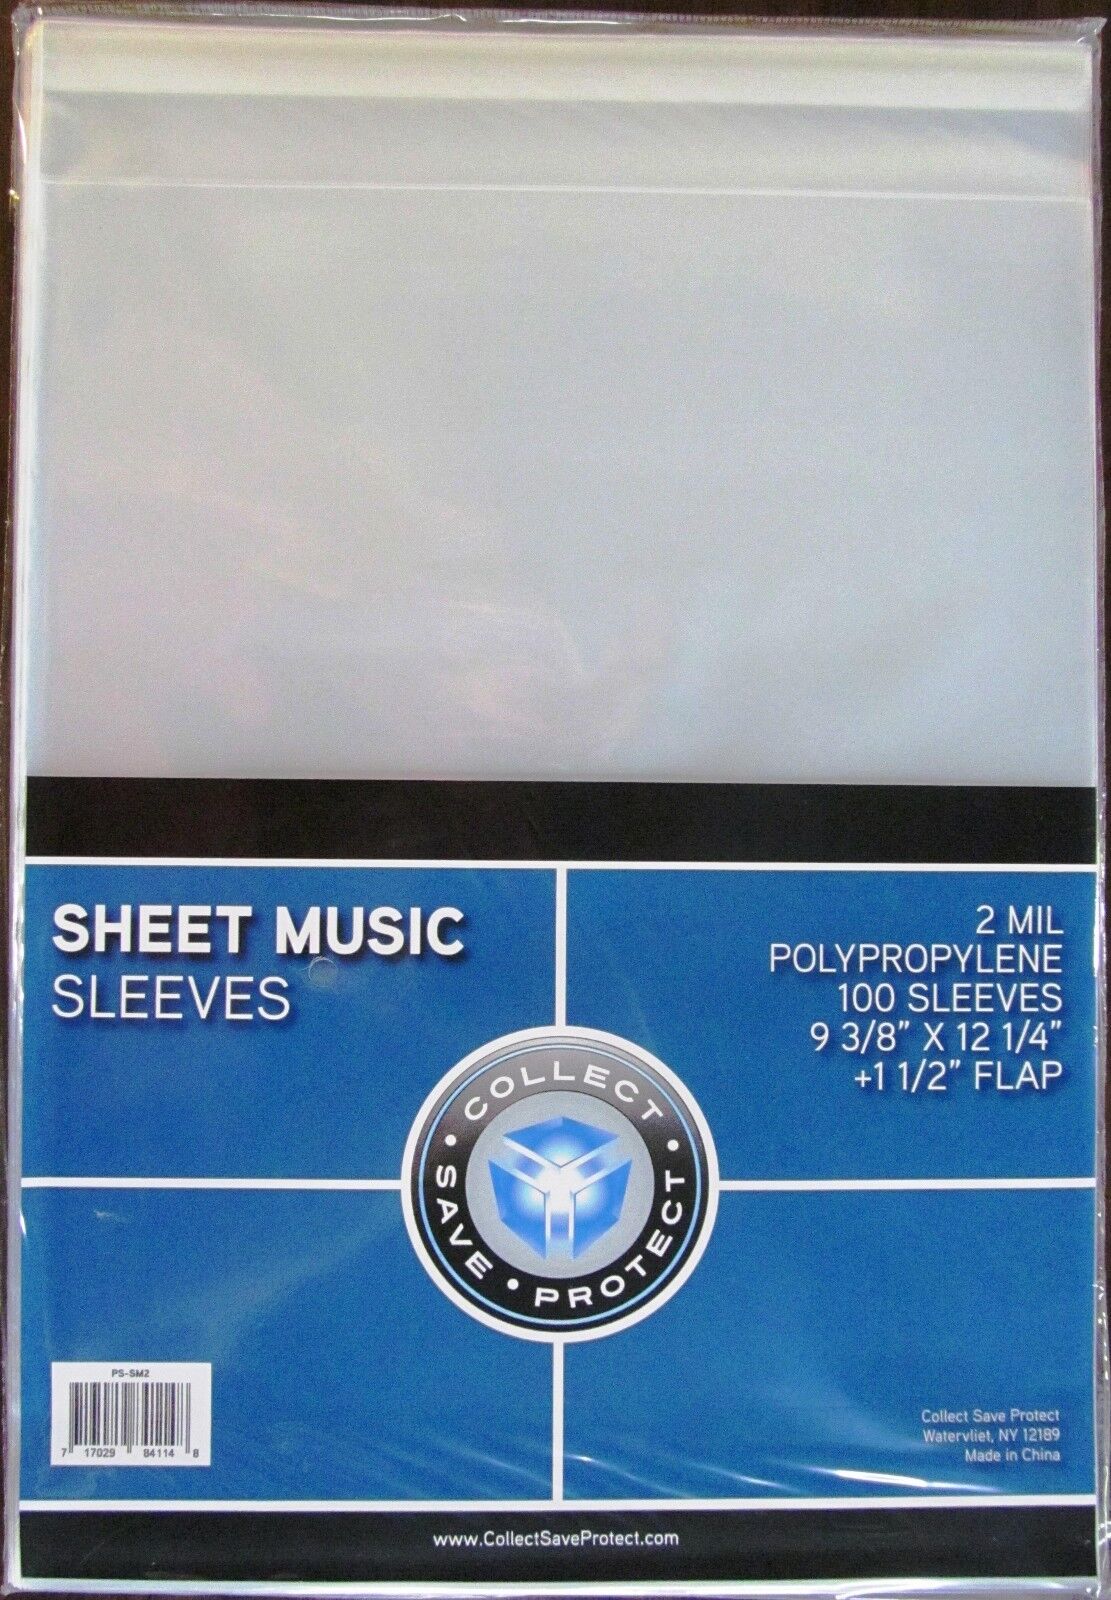 1000 CSP SHEET MUSIC SIZE SLEEVES COVERS W/RESEAL FLAP 9 3/8X12 1/4 + 1.5\